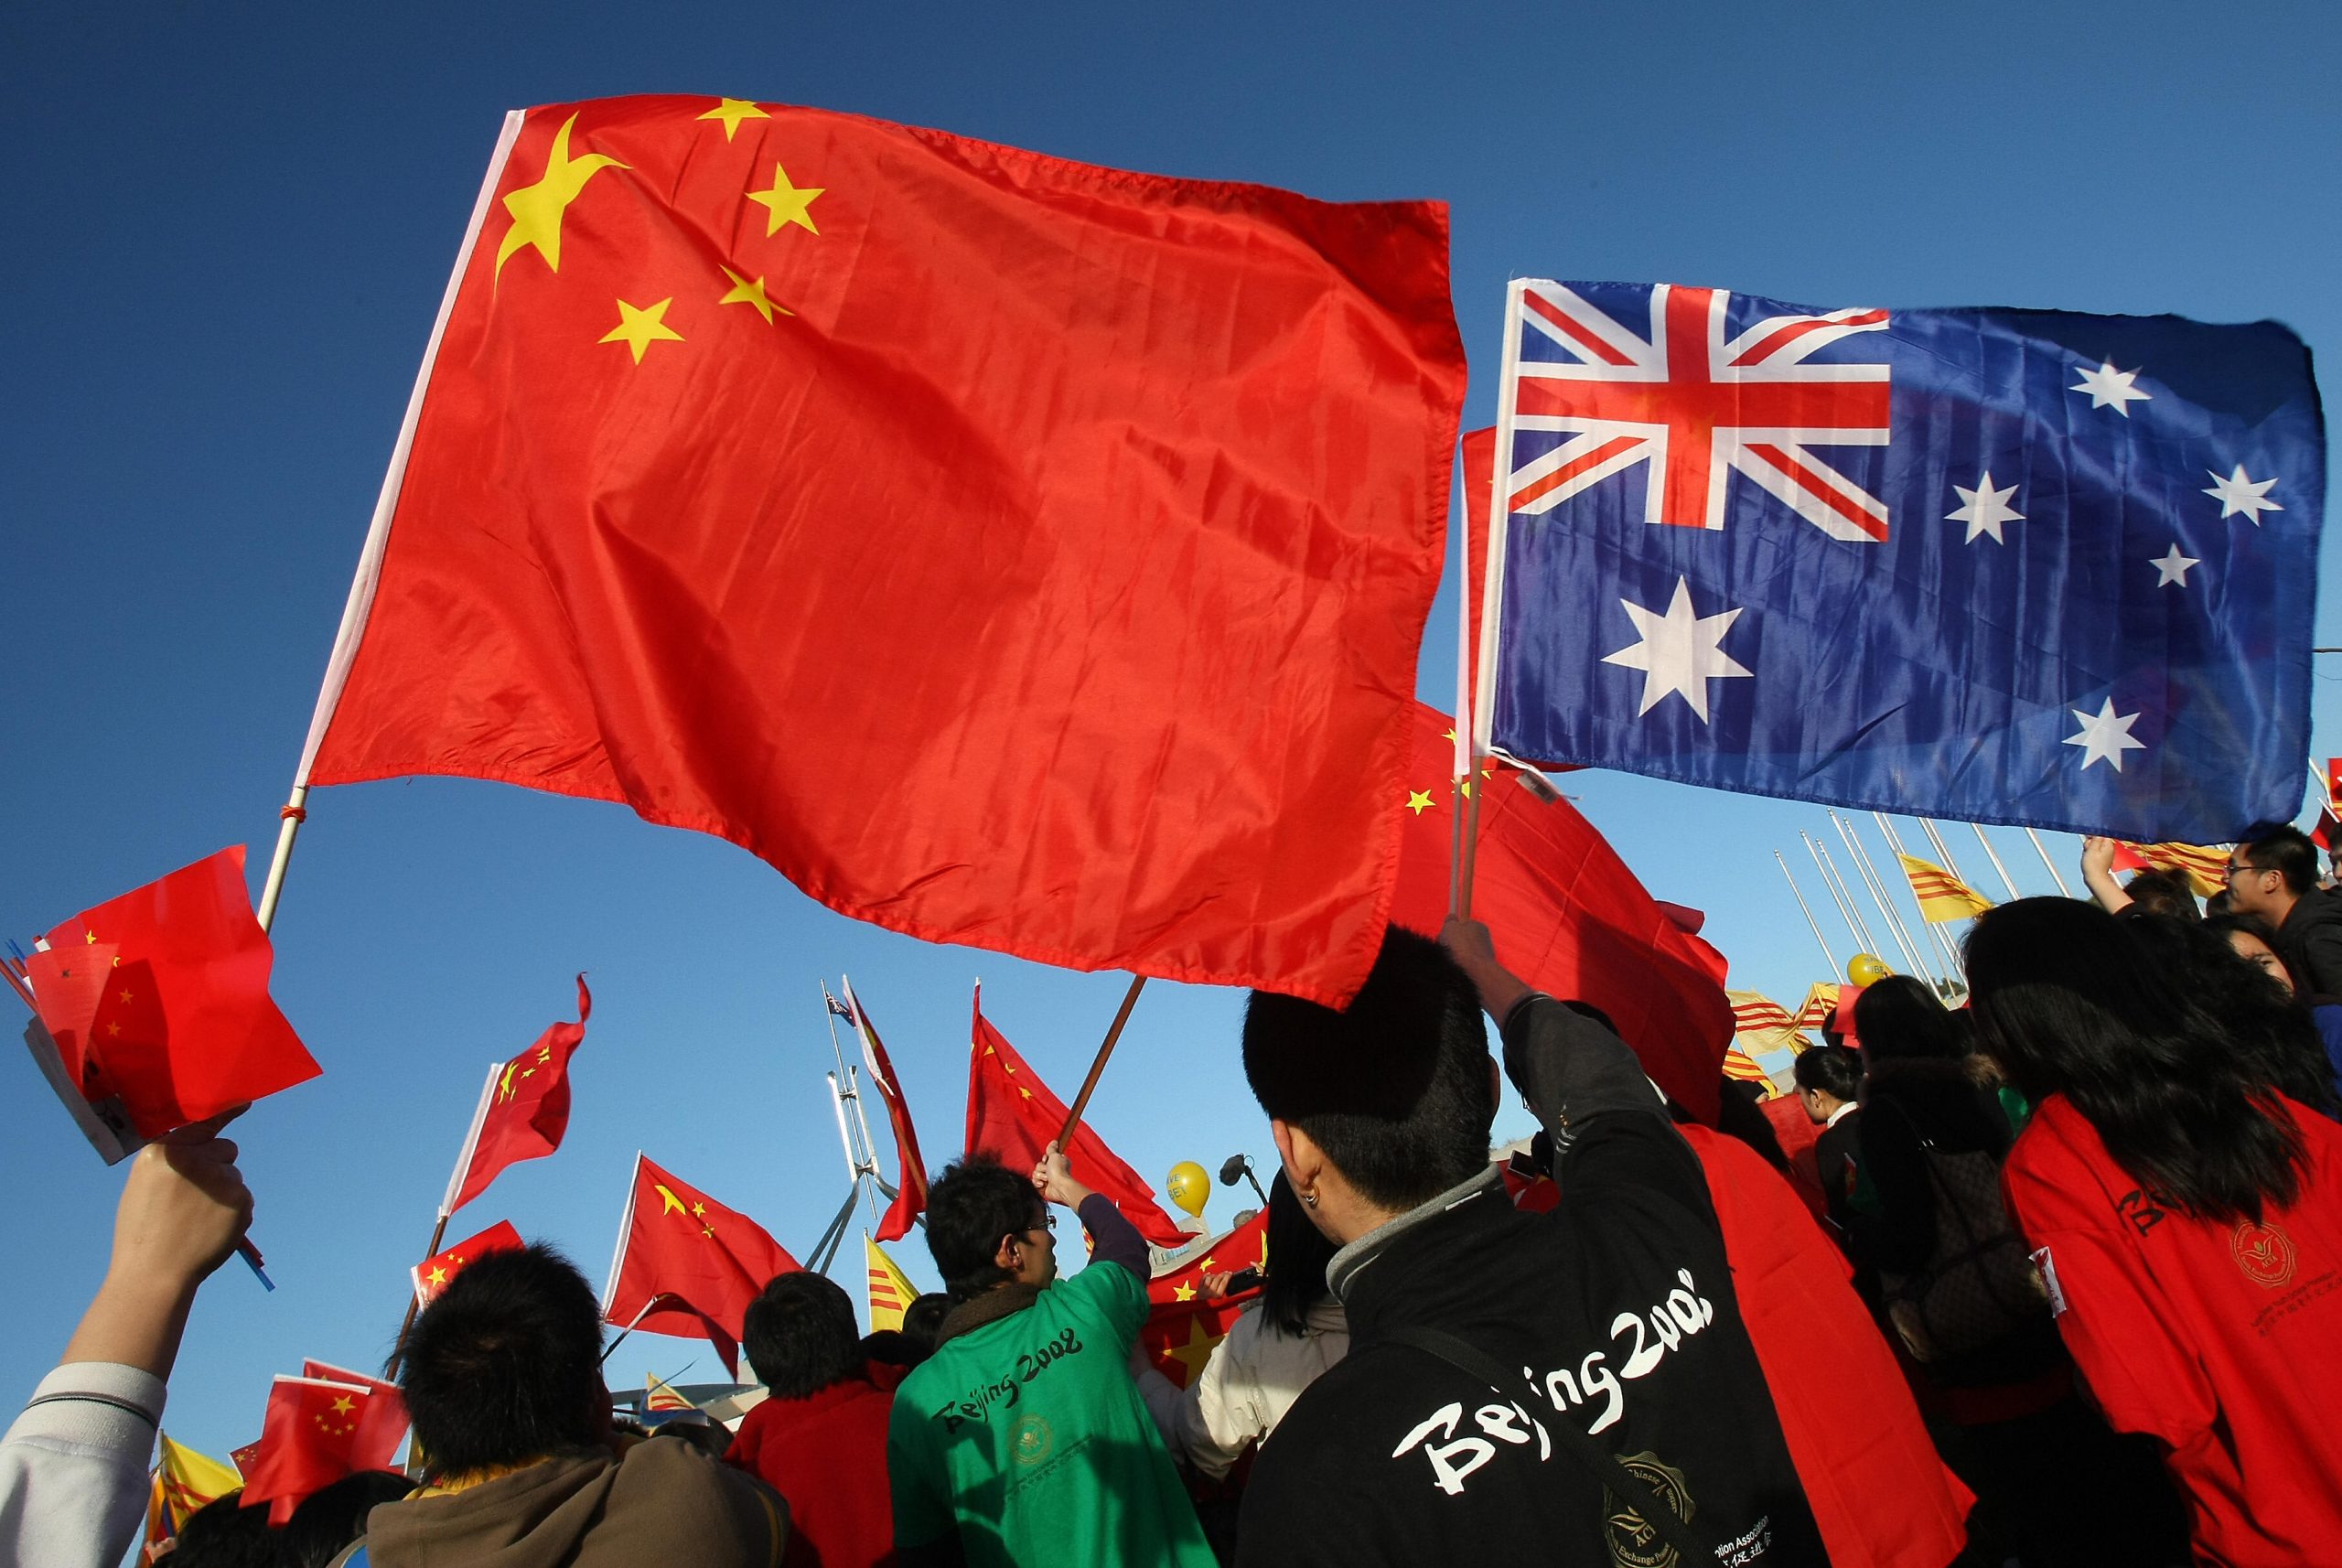 The former Australian prime minister said Australia and China need to find common ground